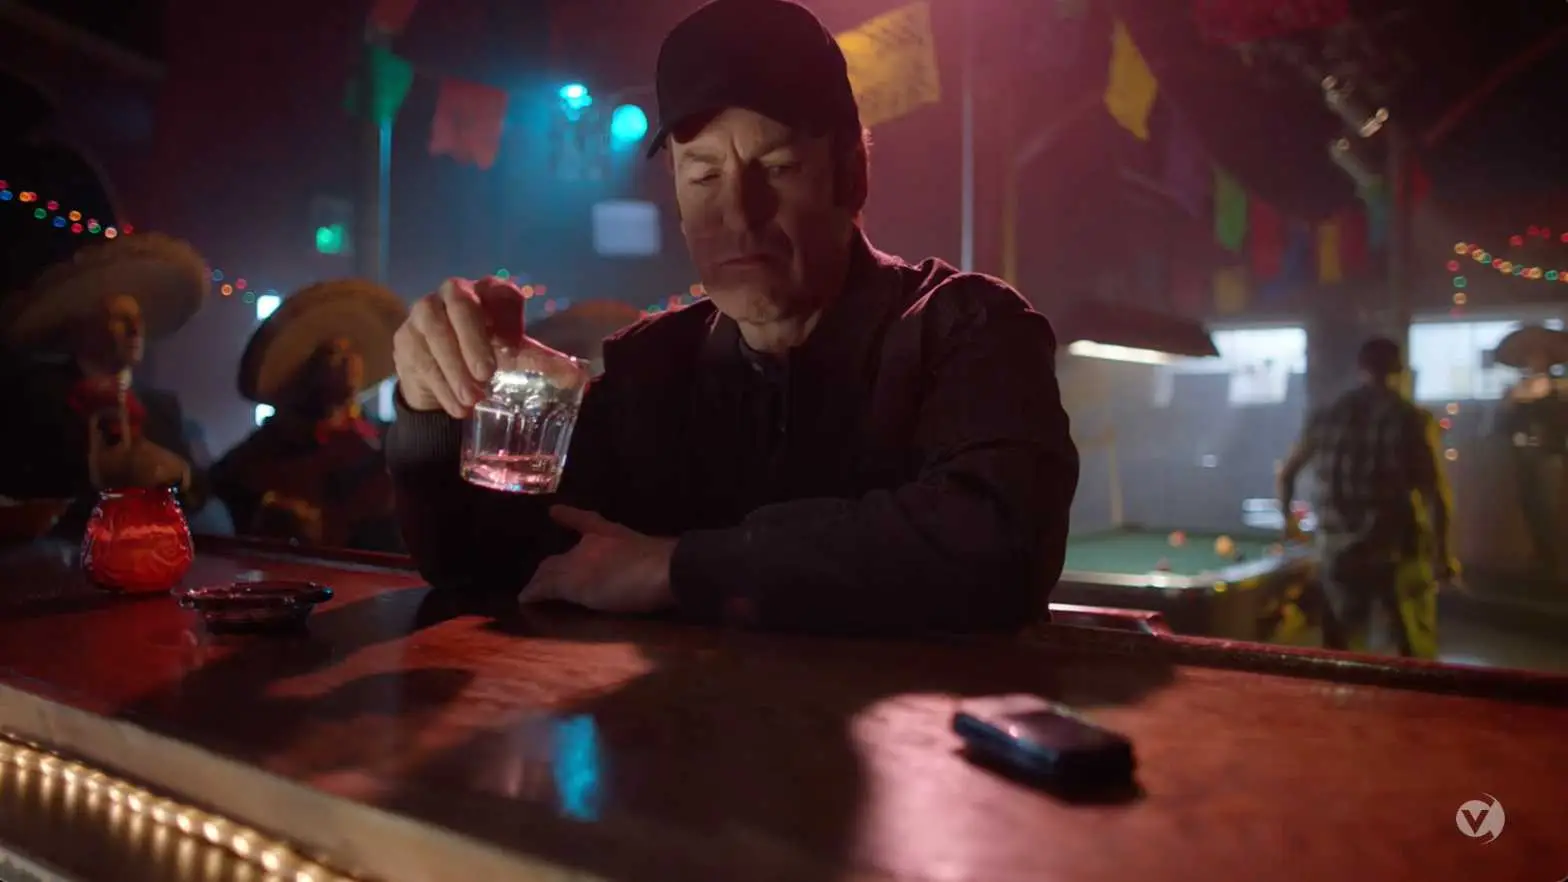 Man sitting at a bar with a somber expression holding a glass of alcohol, with festive decorations and people in the background, reminiscent of a scene from a content library.